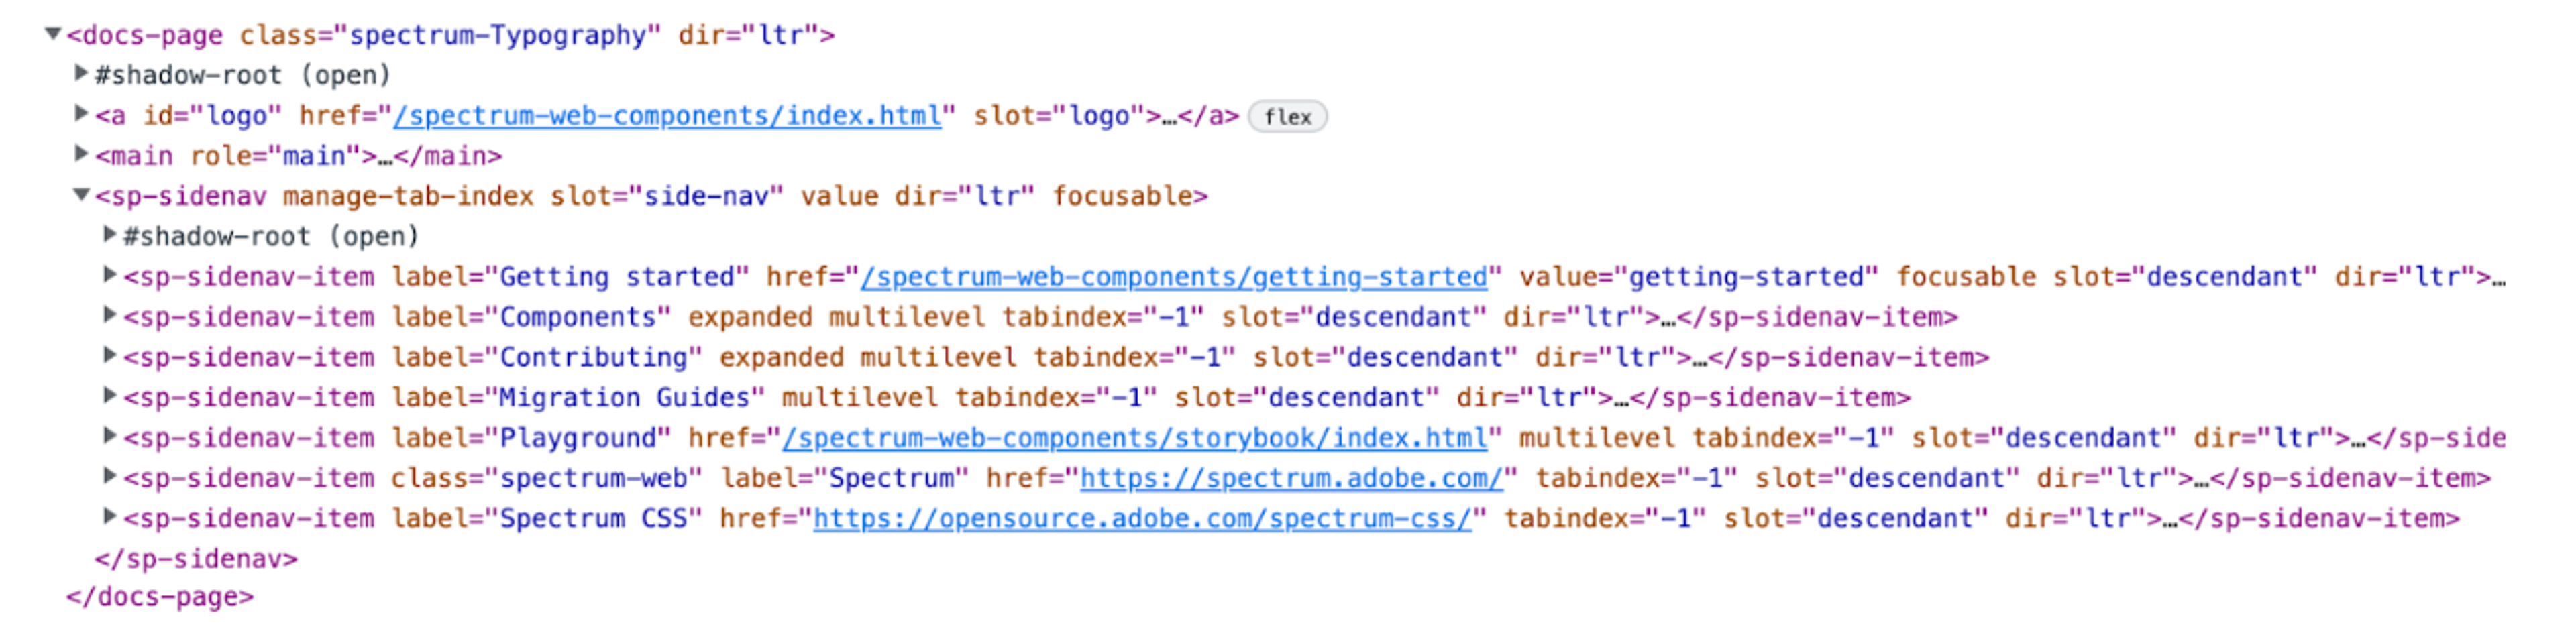 Adobe's HTML DOM structure showing custom HTML.